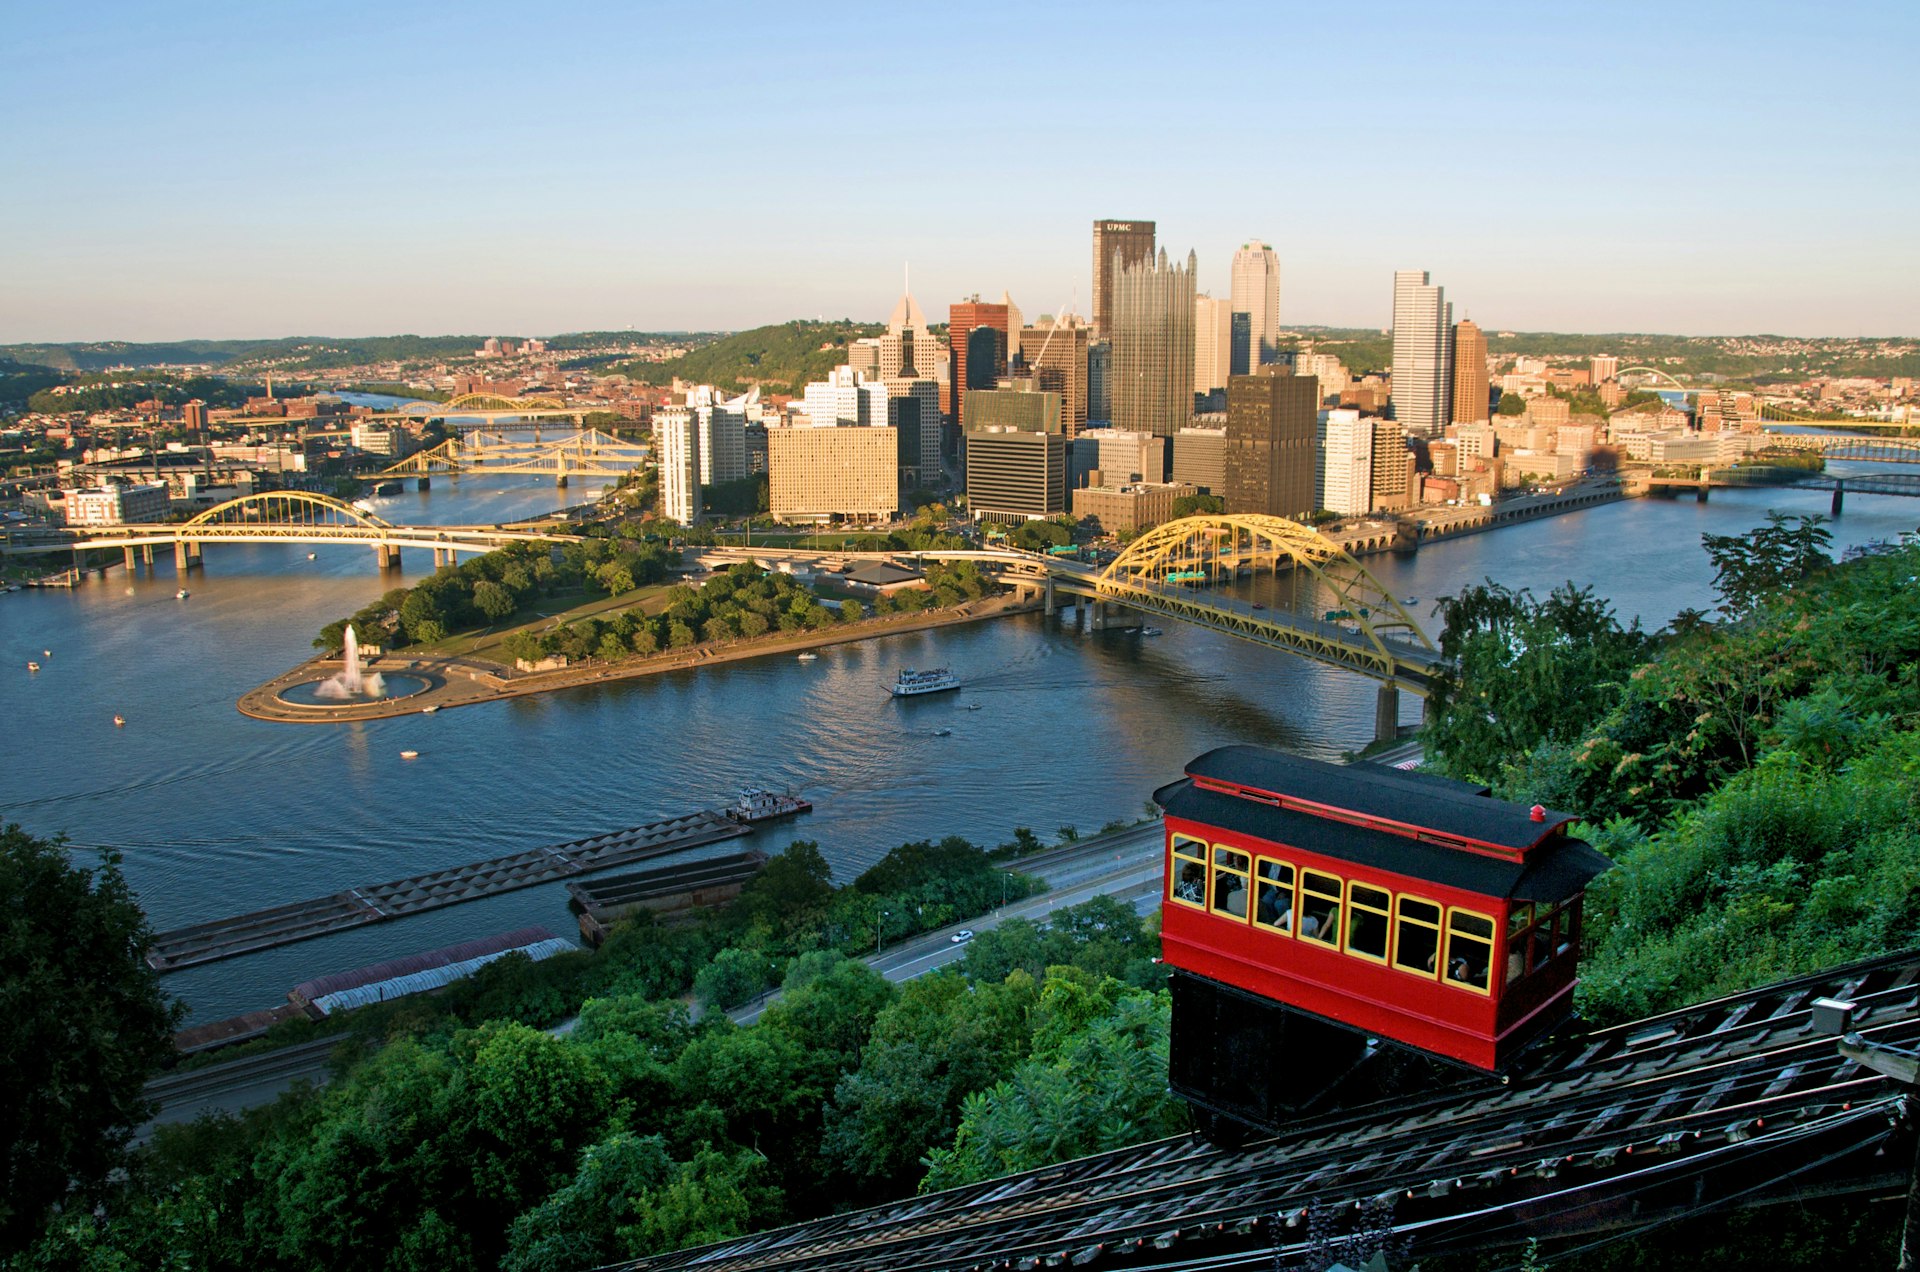 Pittsburgh skyline with high-rise buildings on an island between two rivers crossed by bridges. In the foreground is a red funicular carriage